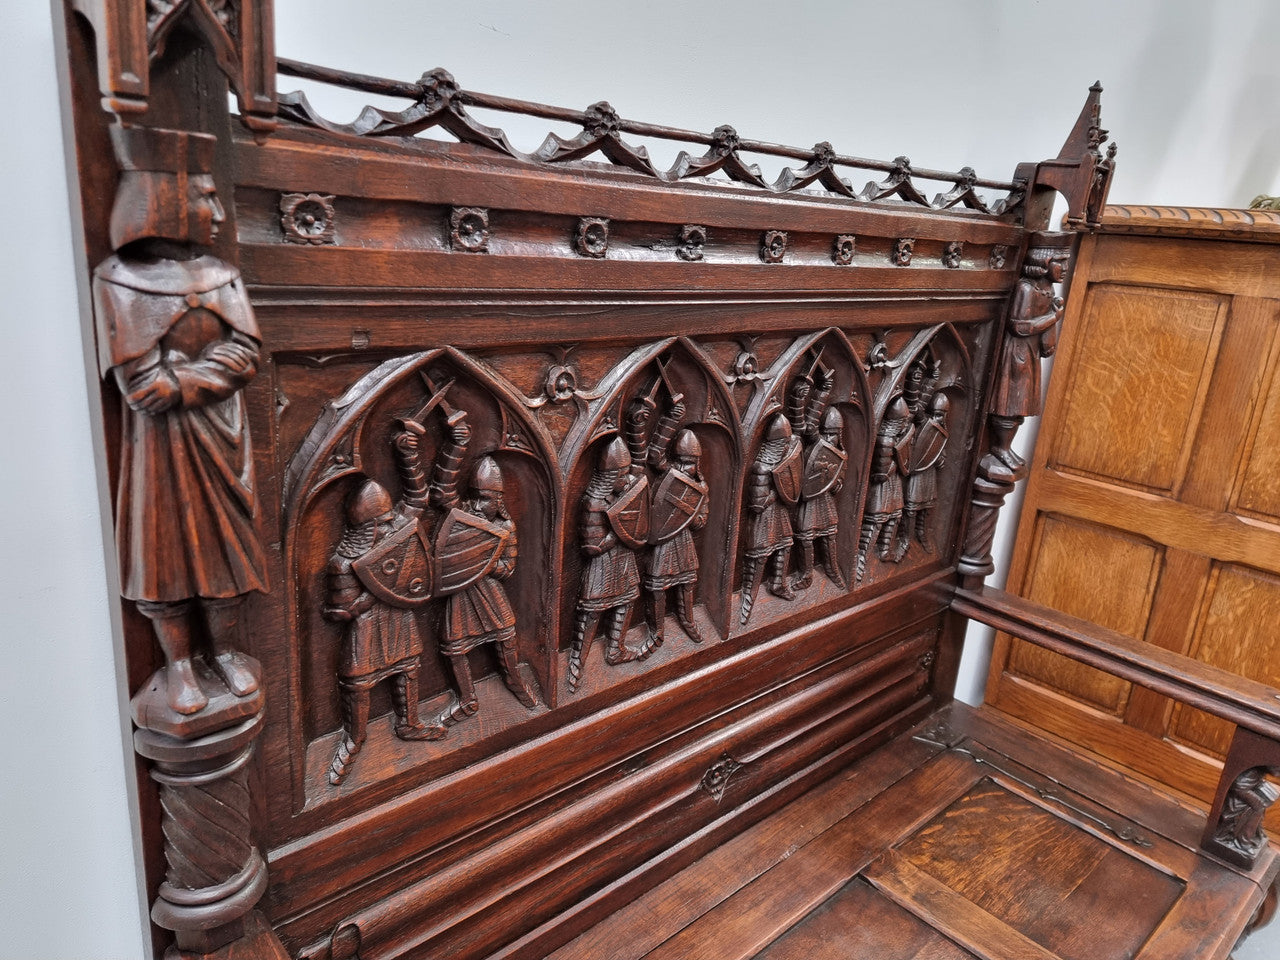 Early 19th Century French Oak Gothic style hall seat with a lift up seat. It has amazing detailed carvings and is in good original detailed condition.